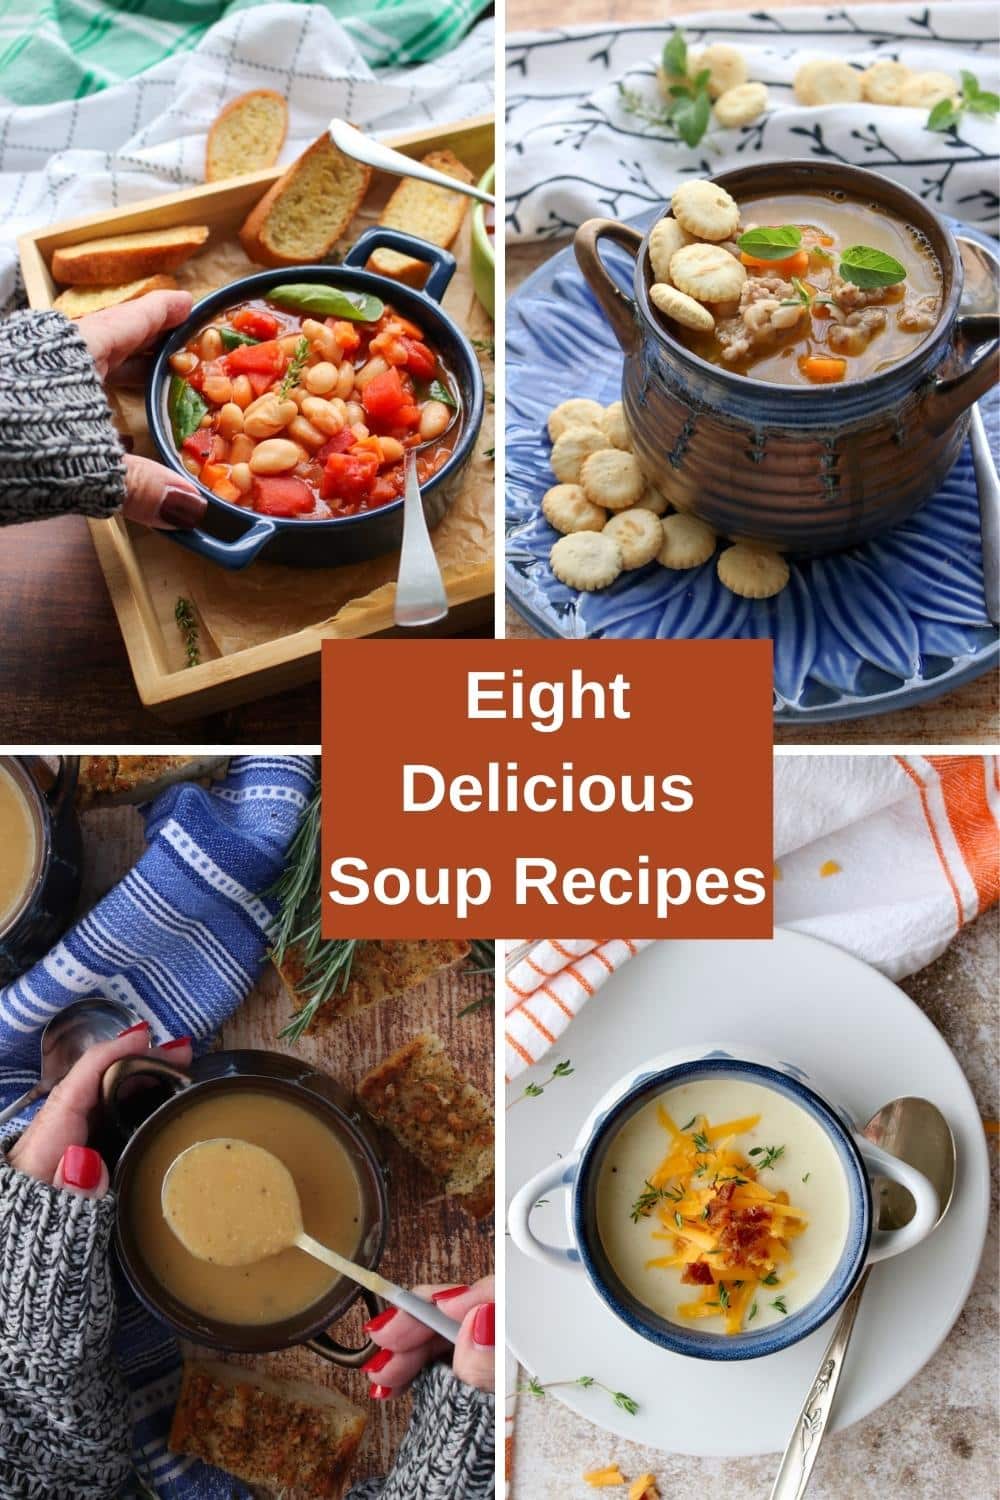 Soup season is upon us, and we have just the recipes to get you through the chilly winter months! Let's discover the tasty world of soup. via @krazykitchenmom